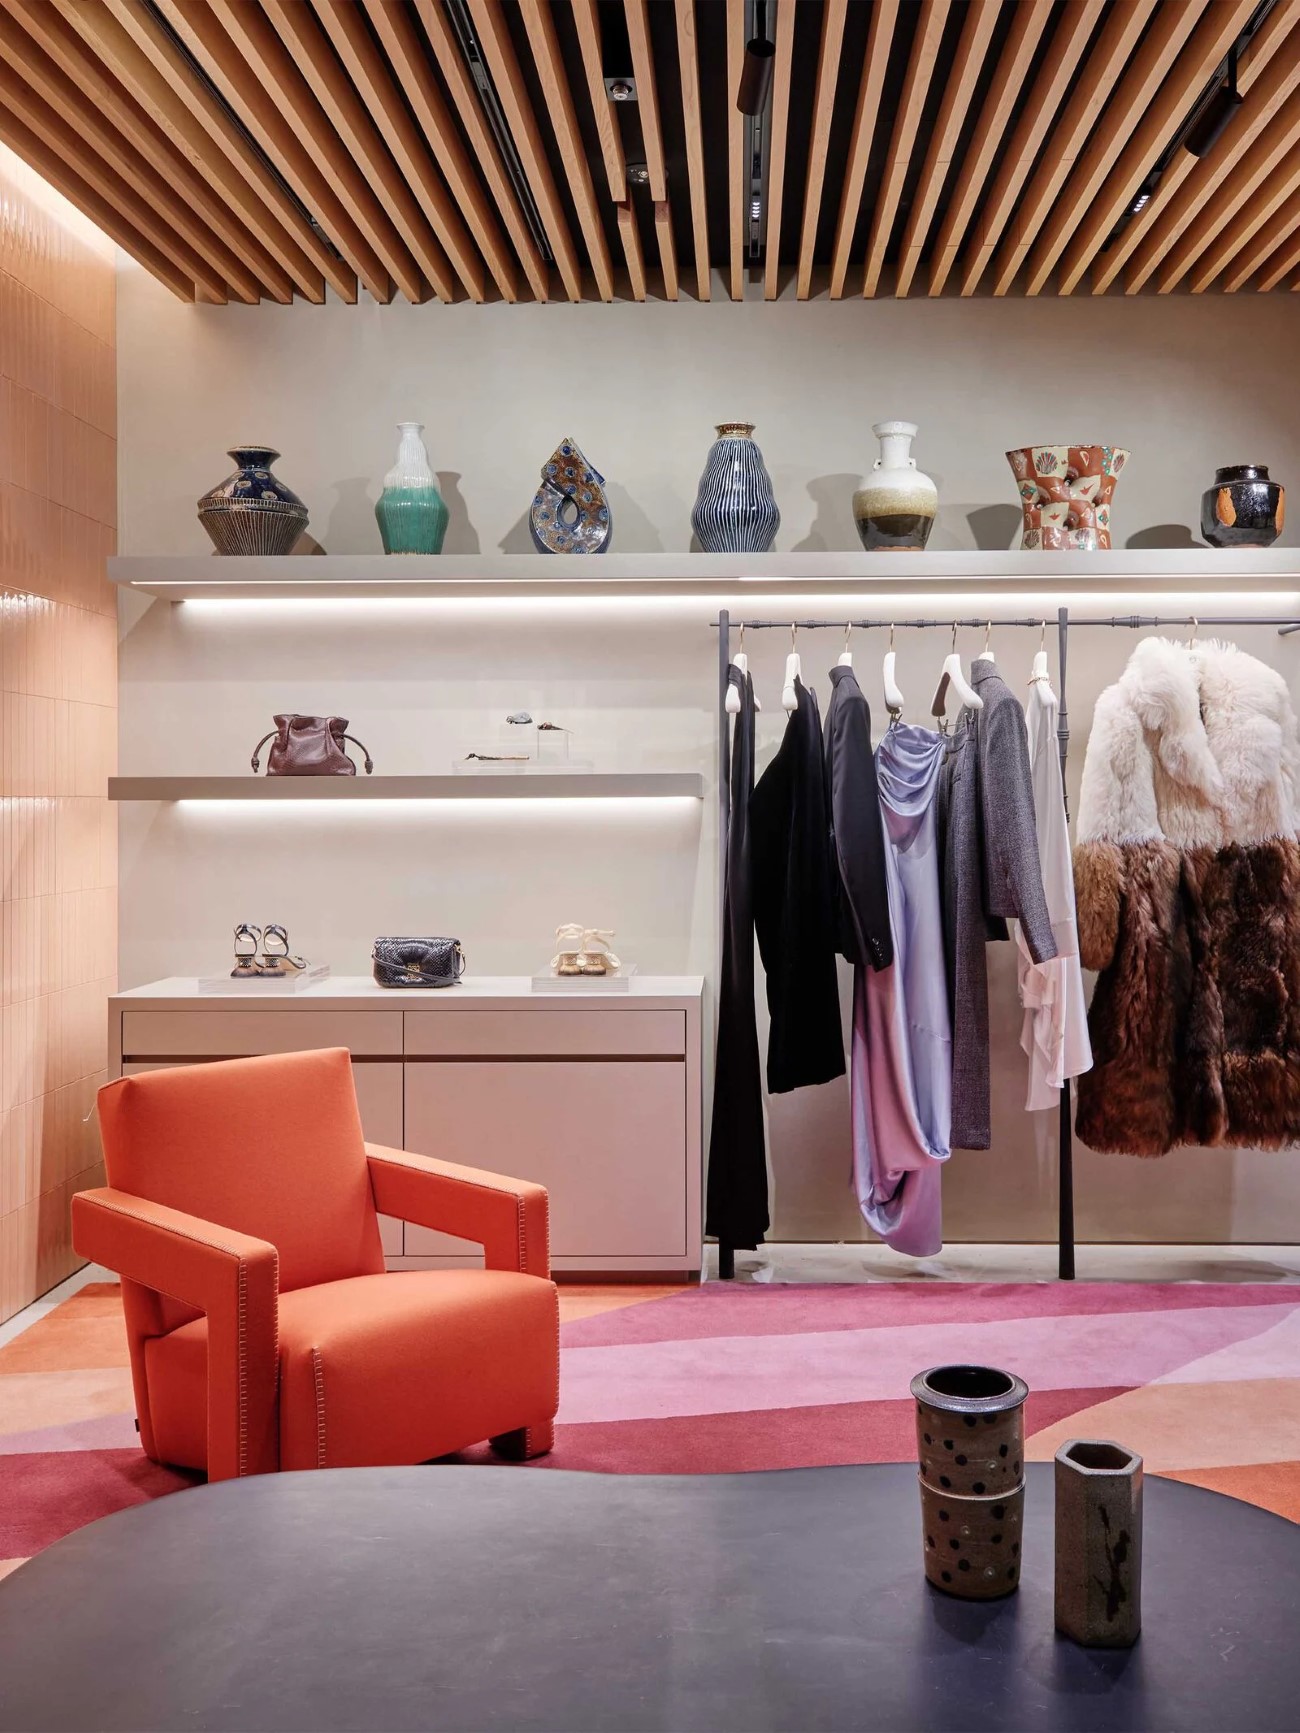 Loewe's Tokyo boutique celebrates nature and art in style